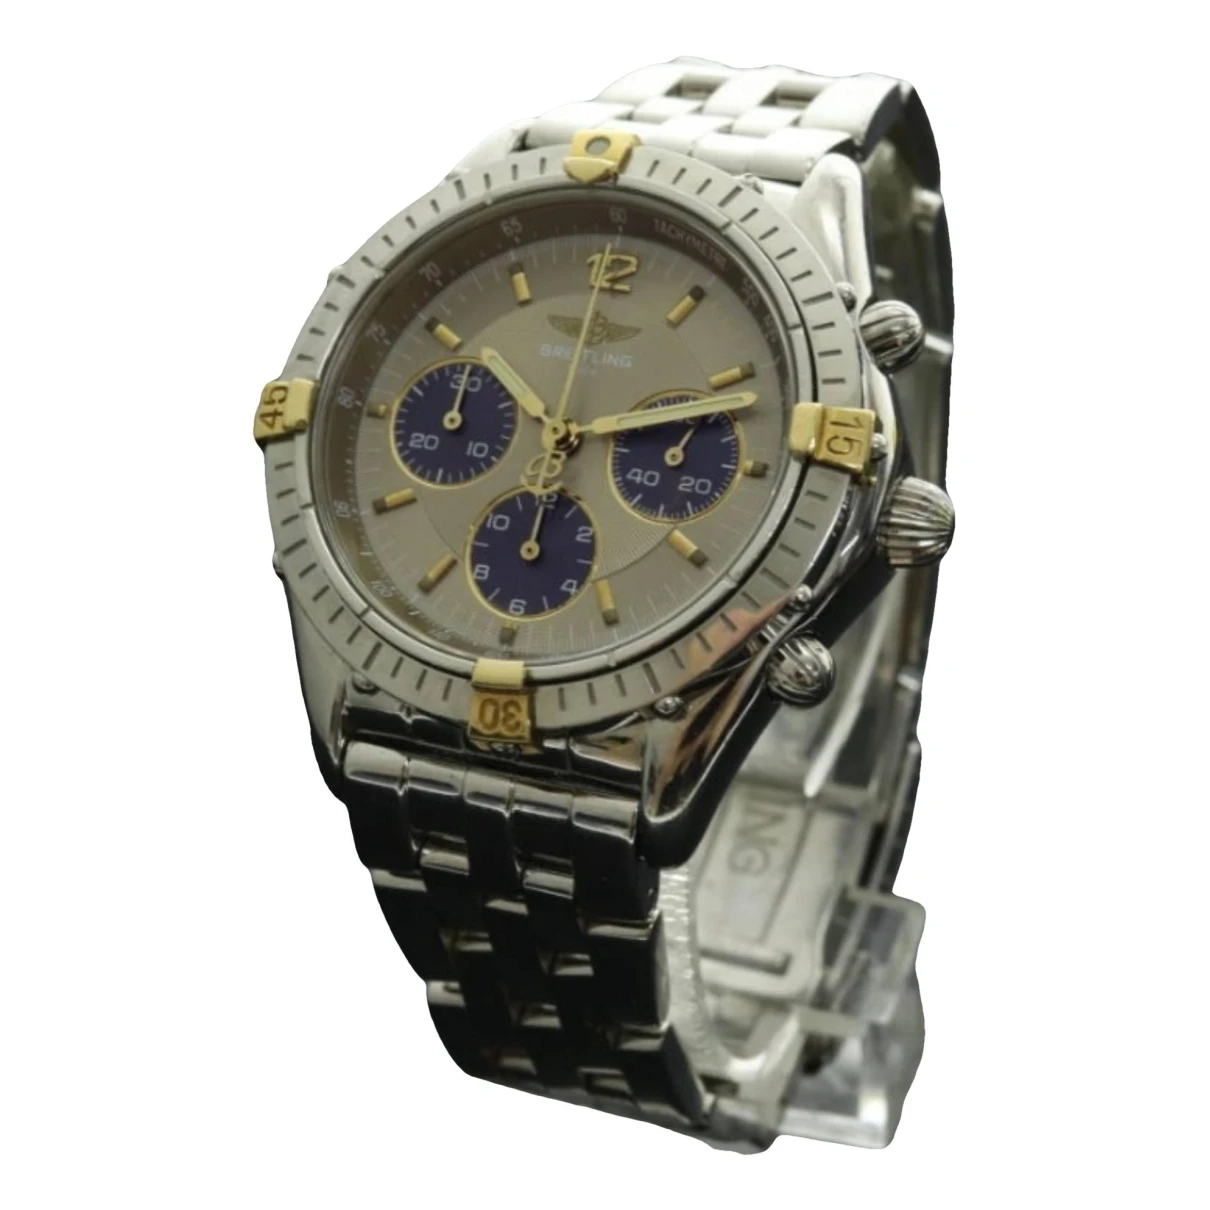 Pre-owned Breitling Chronomat Watch In Silver